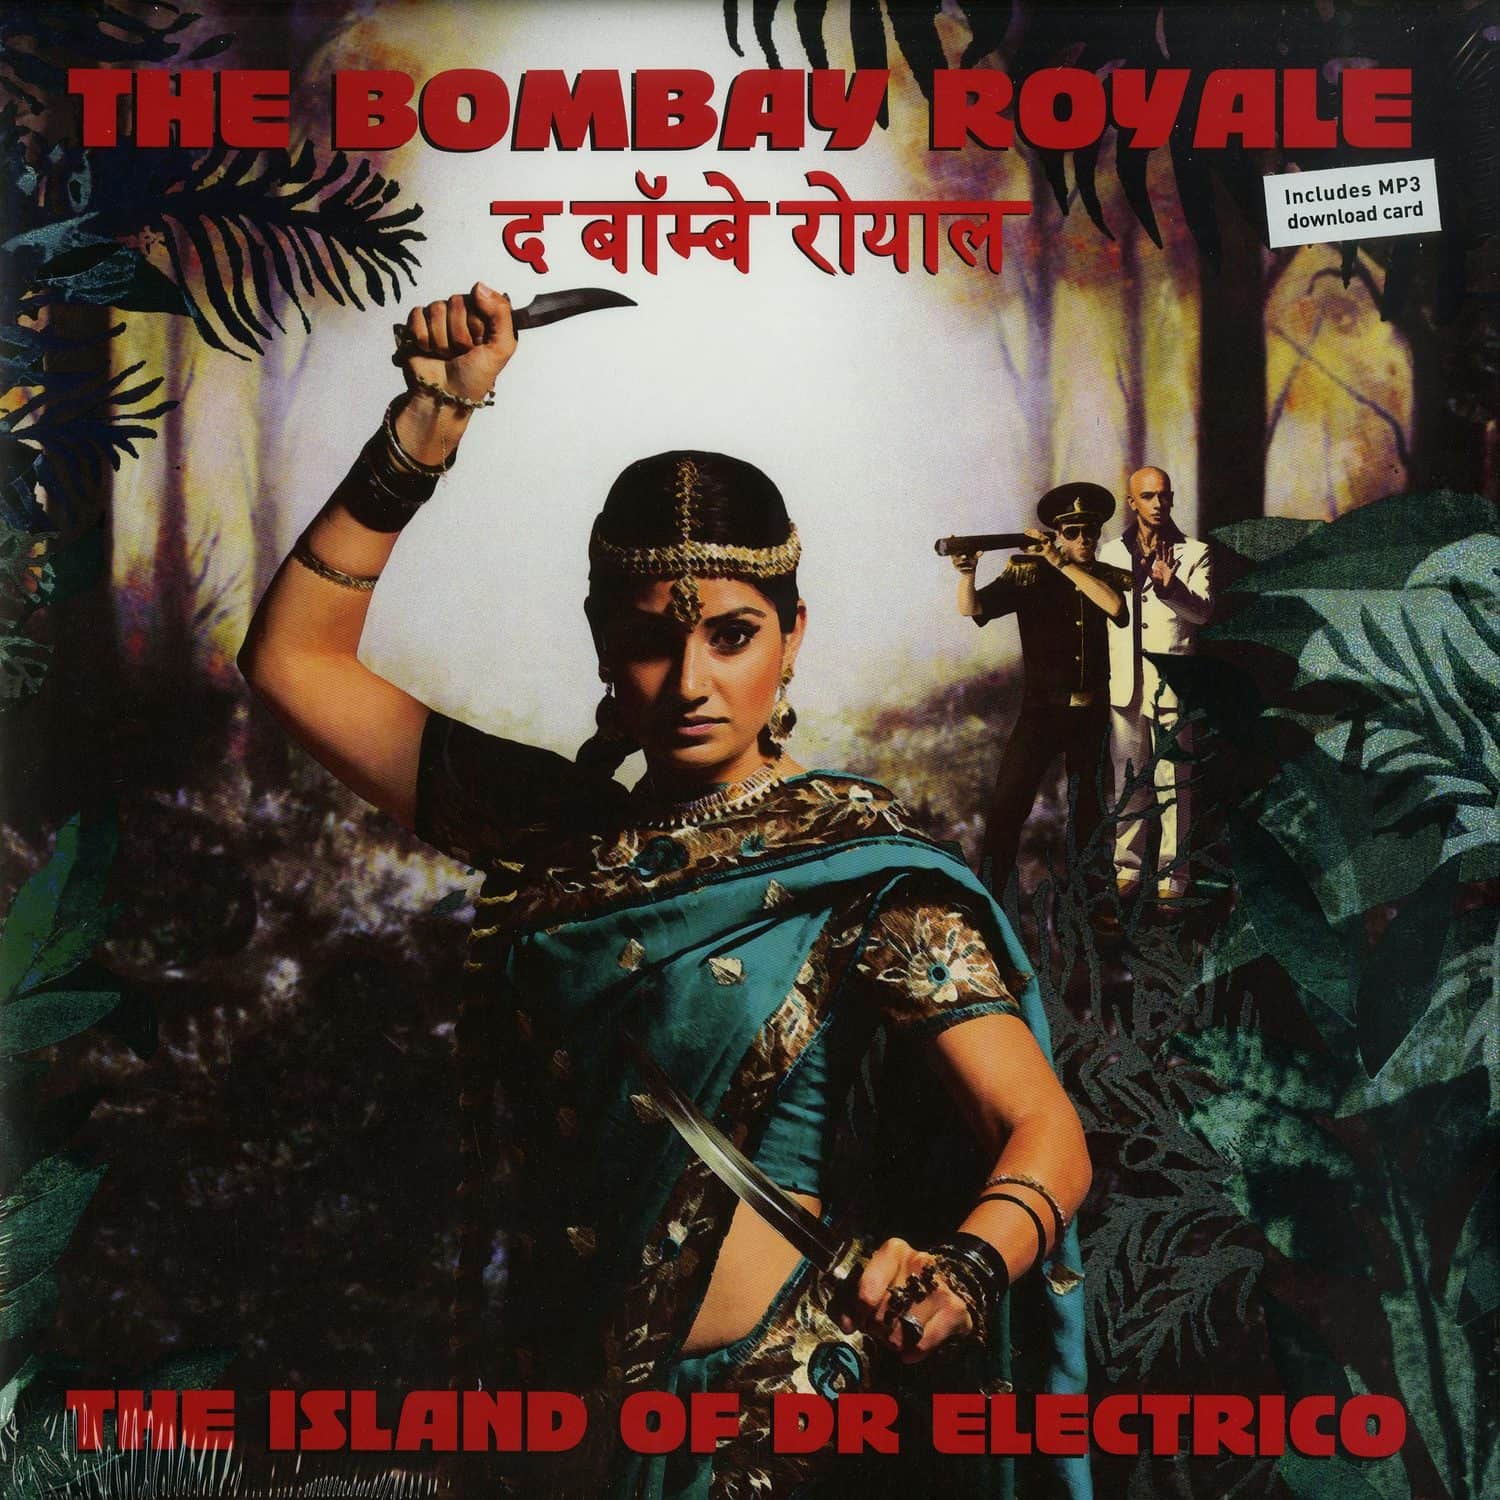 The Bombay Royale - THE ISLAND OF DR. ELECTRICO 